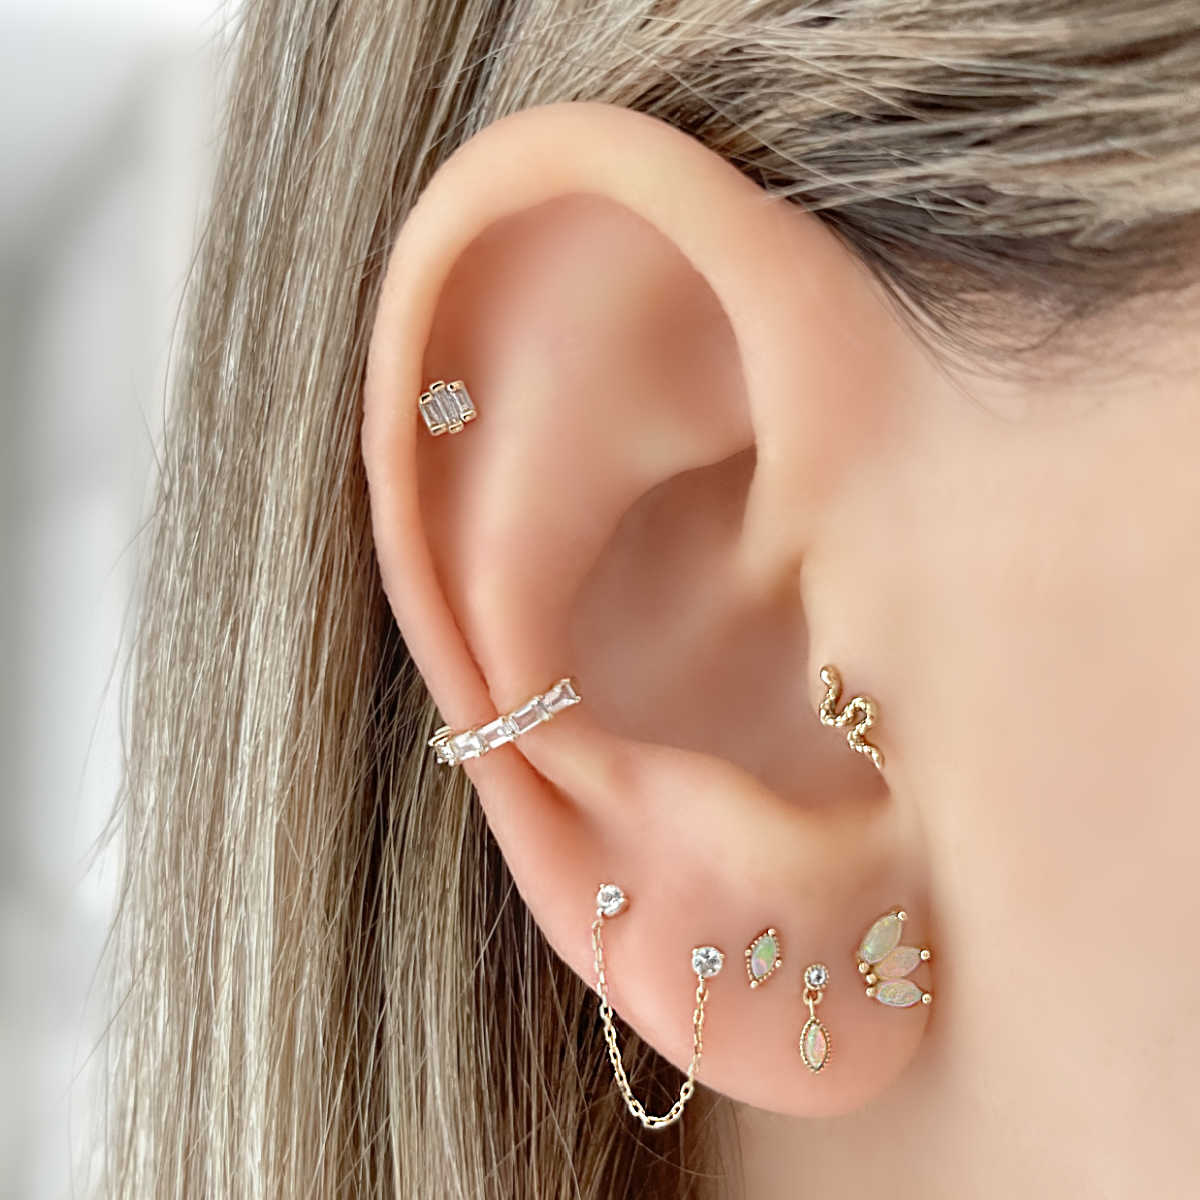 Baguette Gold Cartilage Ear Cuff | No Piercing Conch Hoop | 14k Gold Ear Cuff Earrings from Two of Most